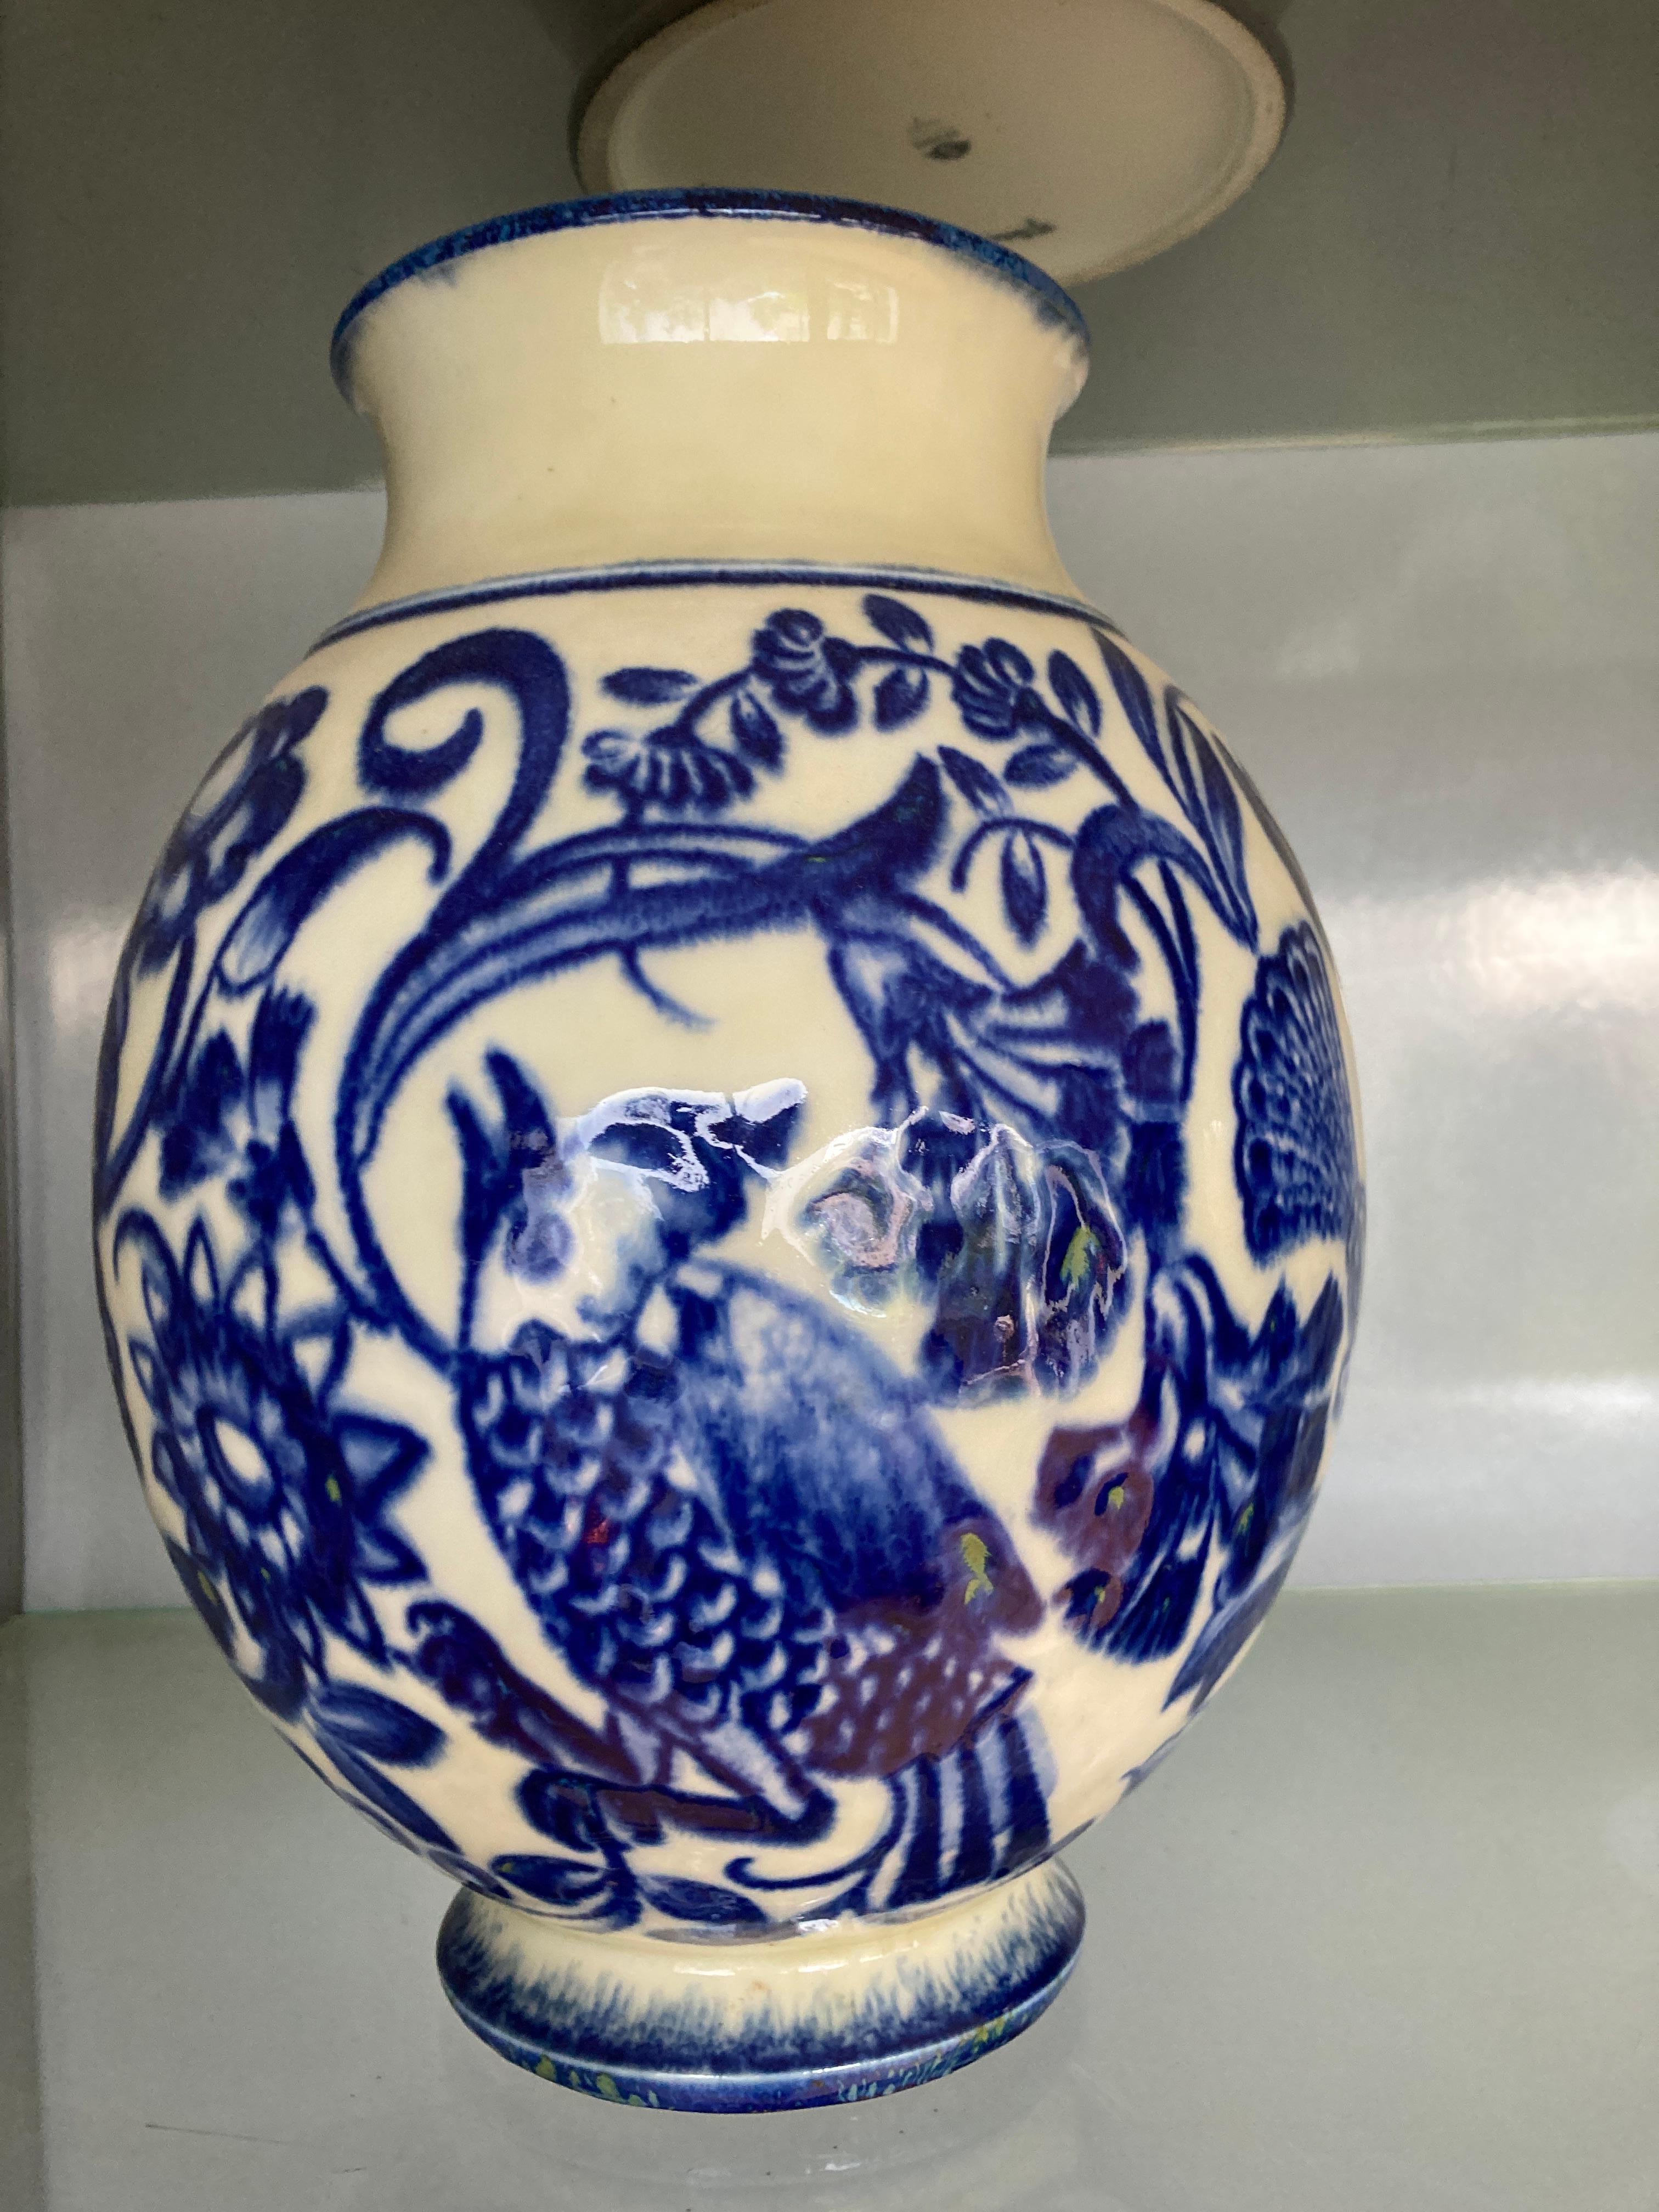 Beautiful porcelaine vase with blue birds
Designed in 1947
Signed with stamps
This is a rare piece from the most prestigious porcelain firm in the world.
